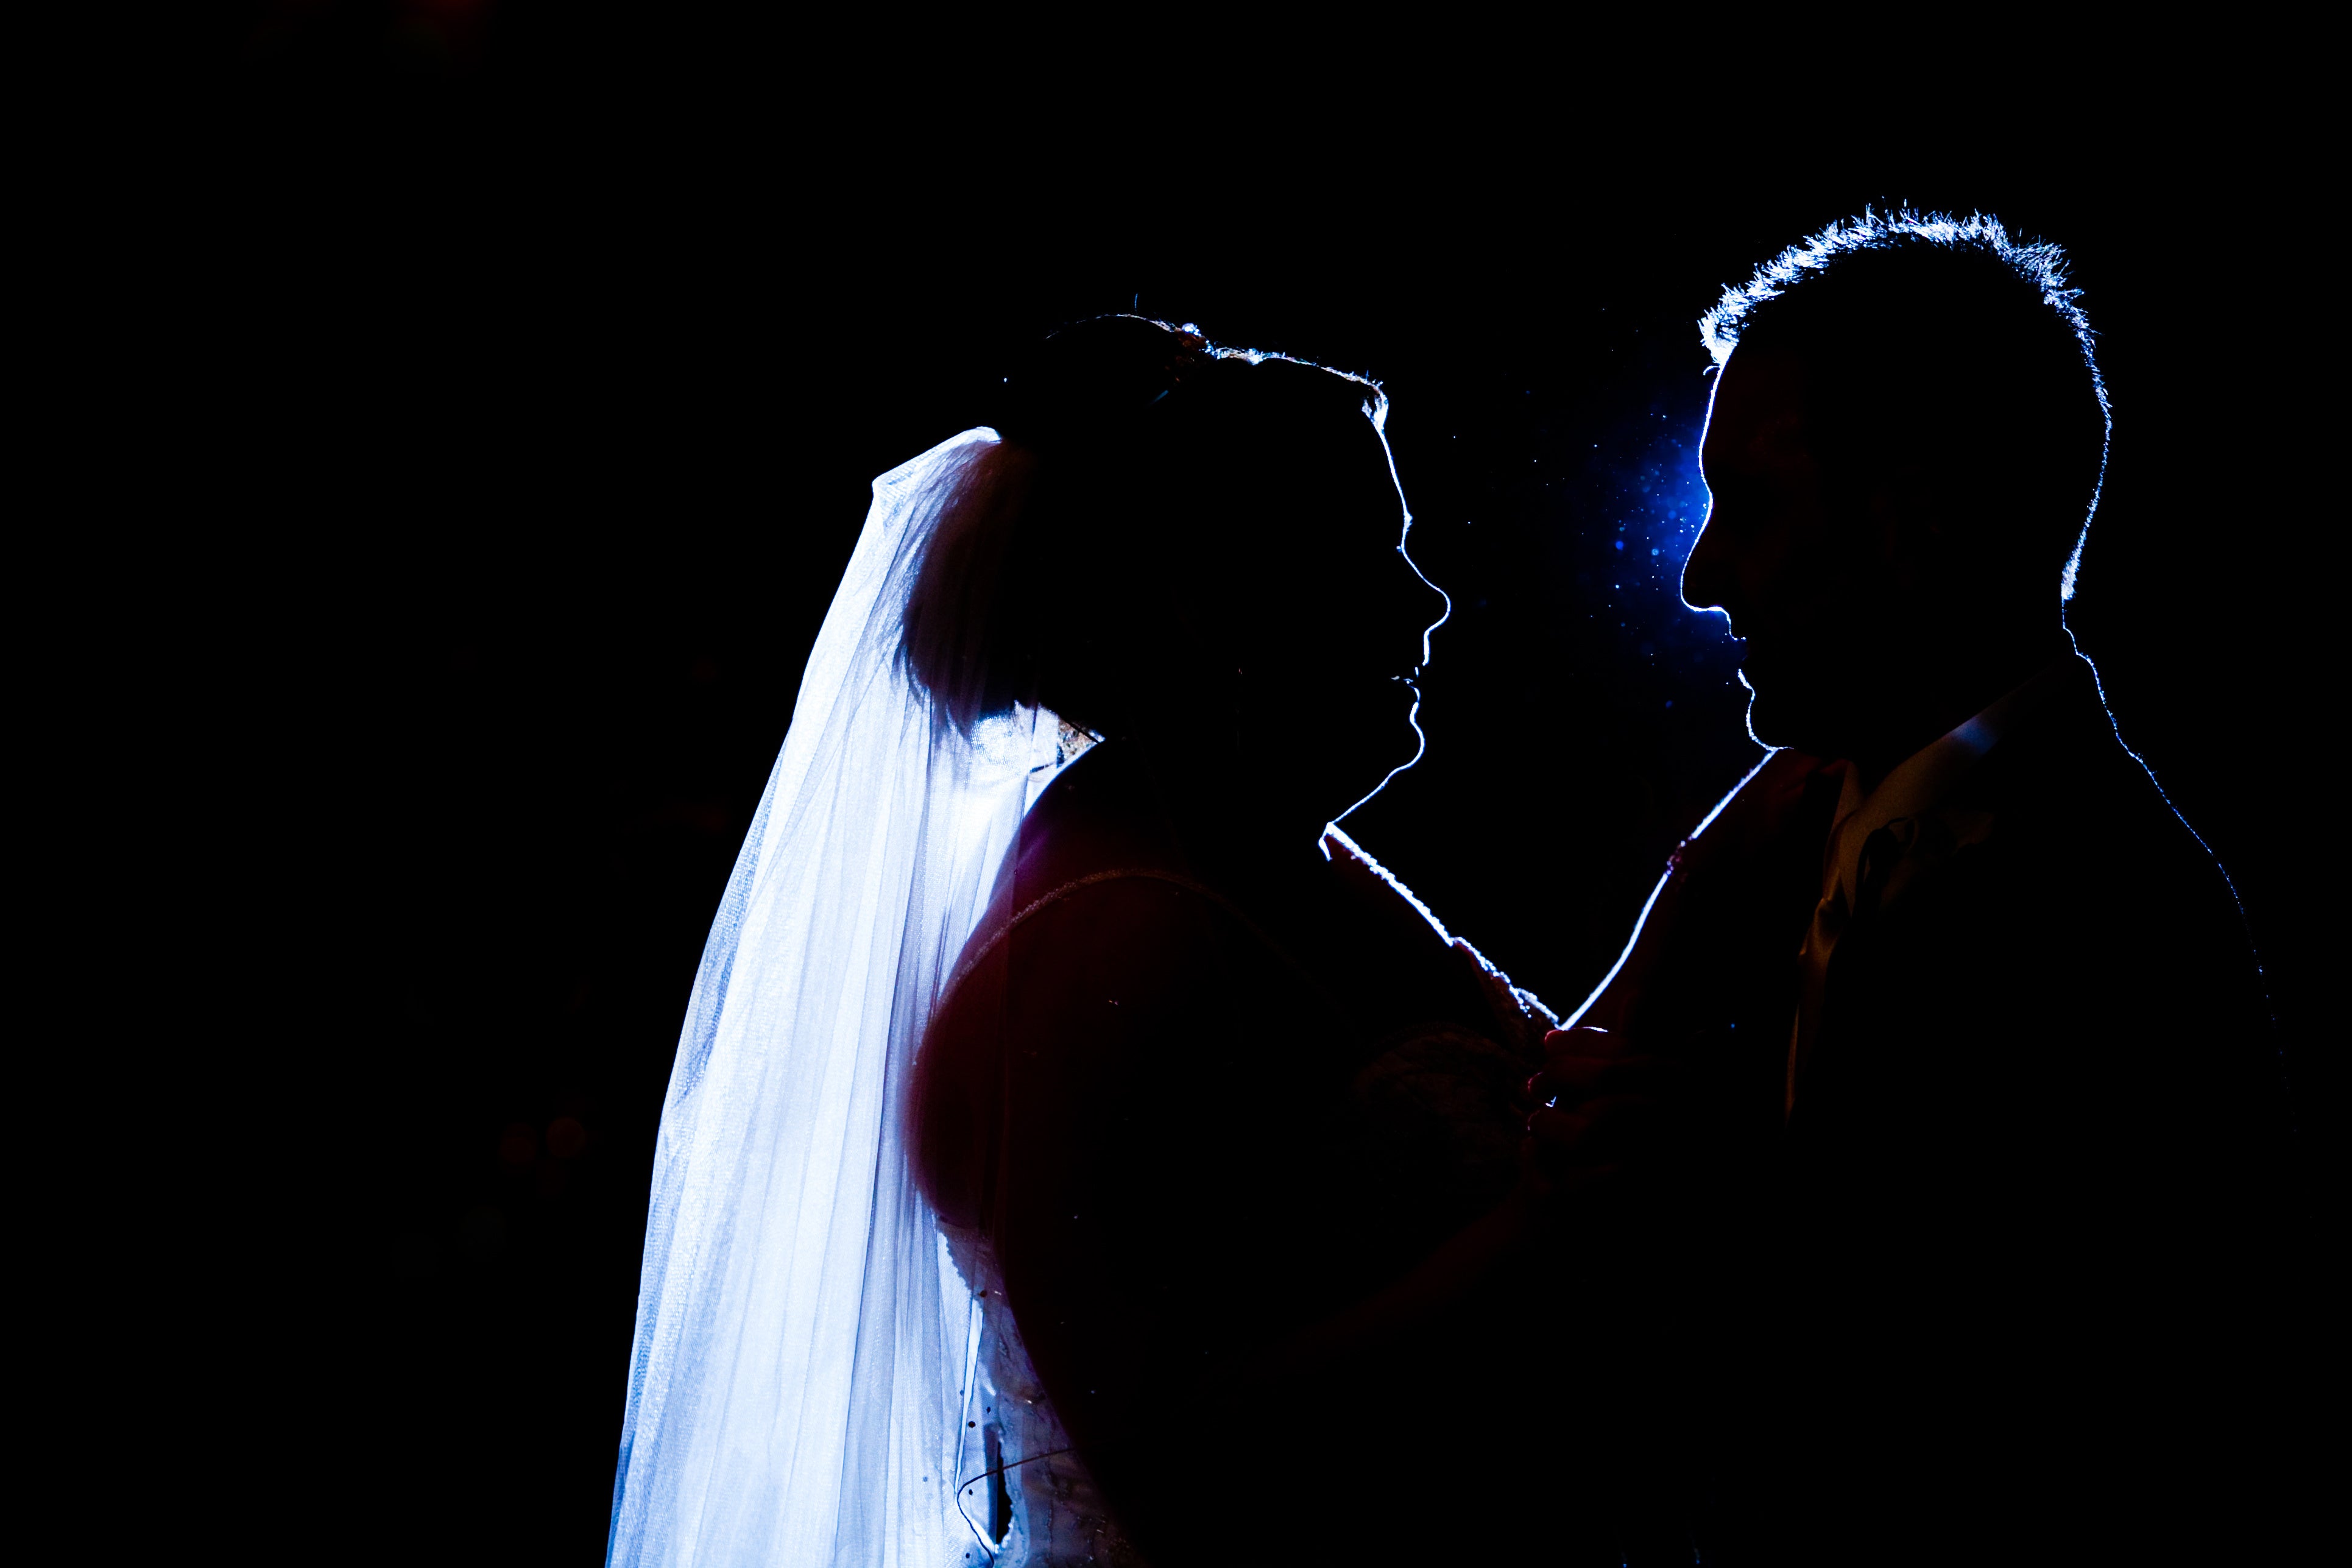 Silhouette of bride and groom having their first dance